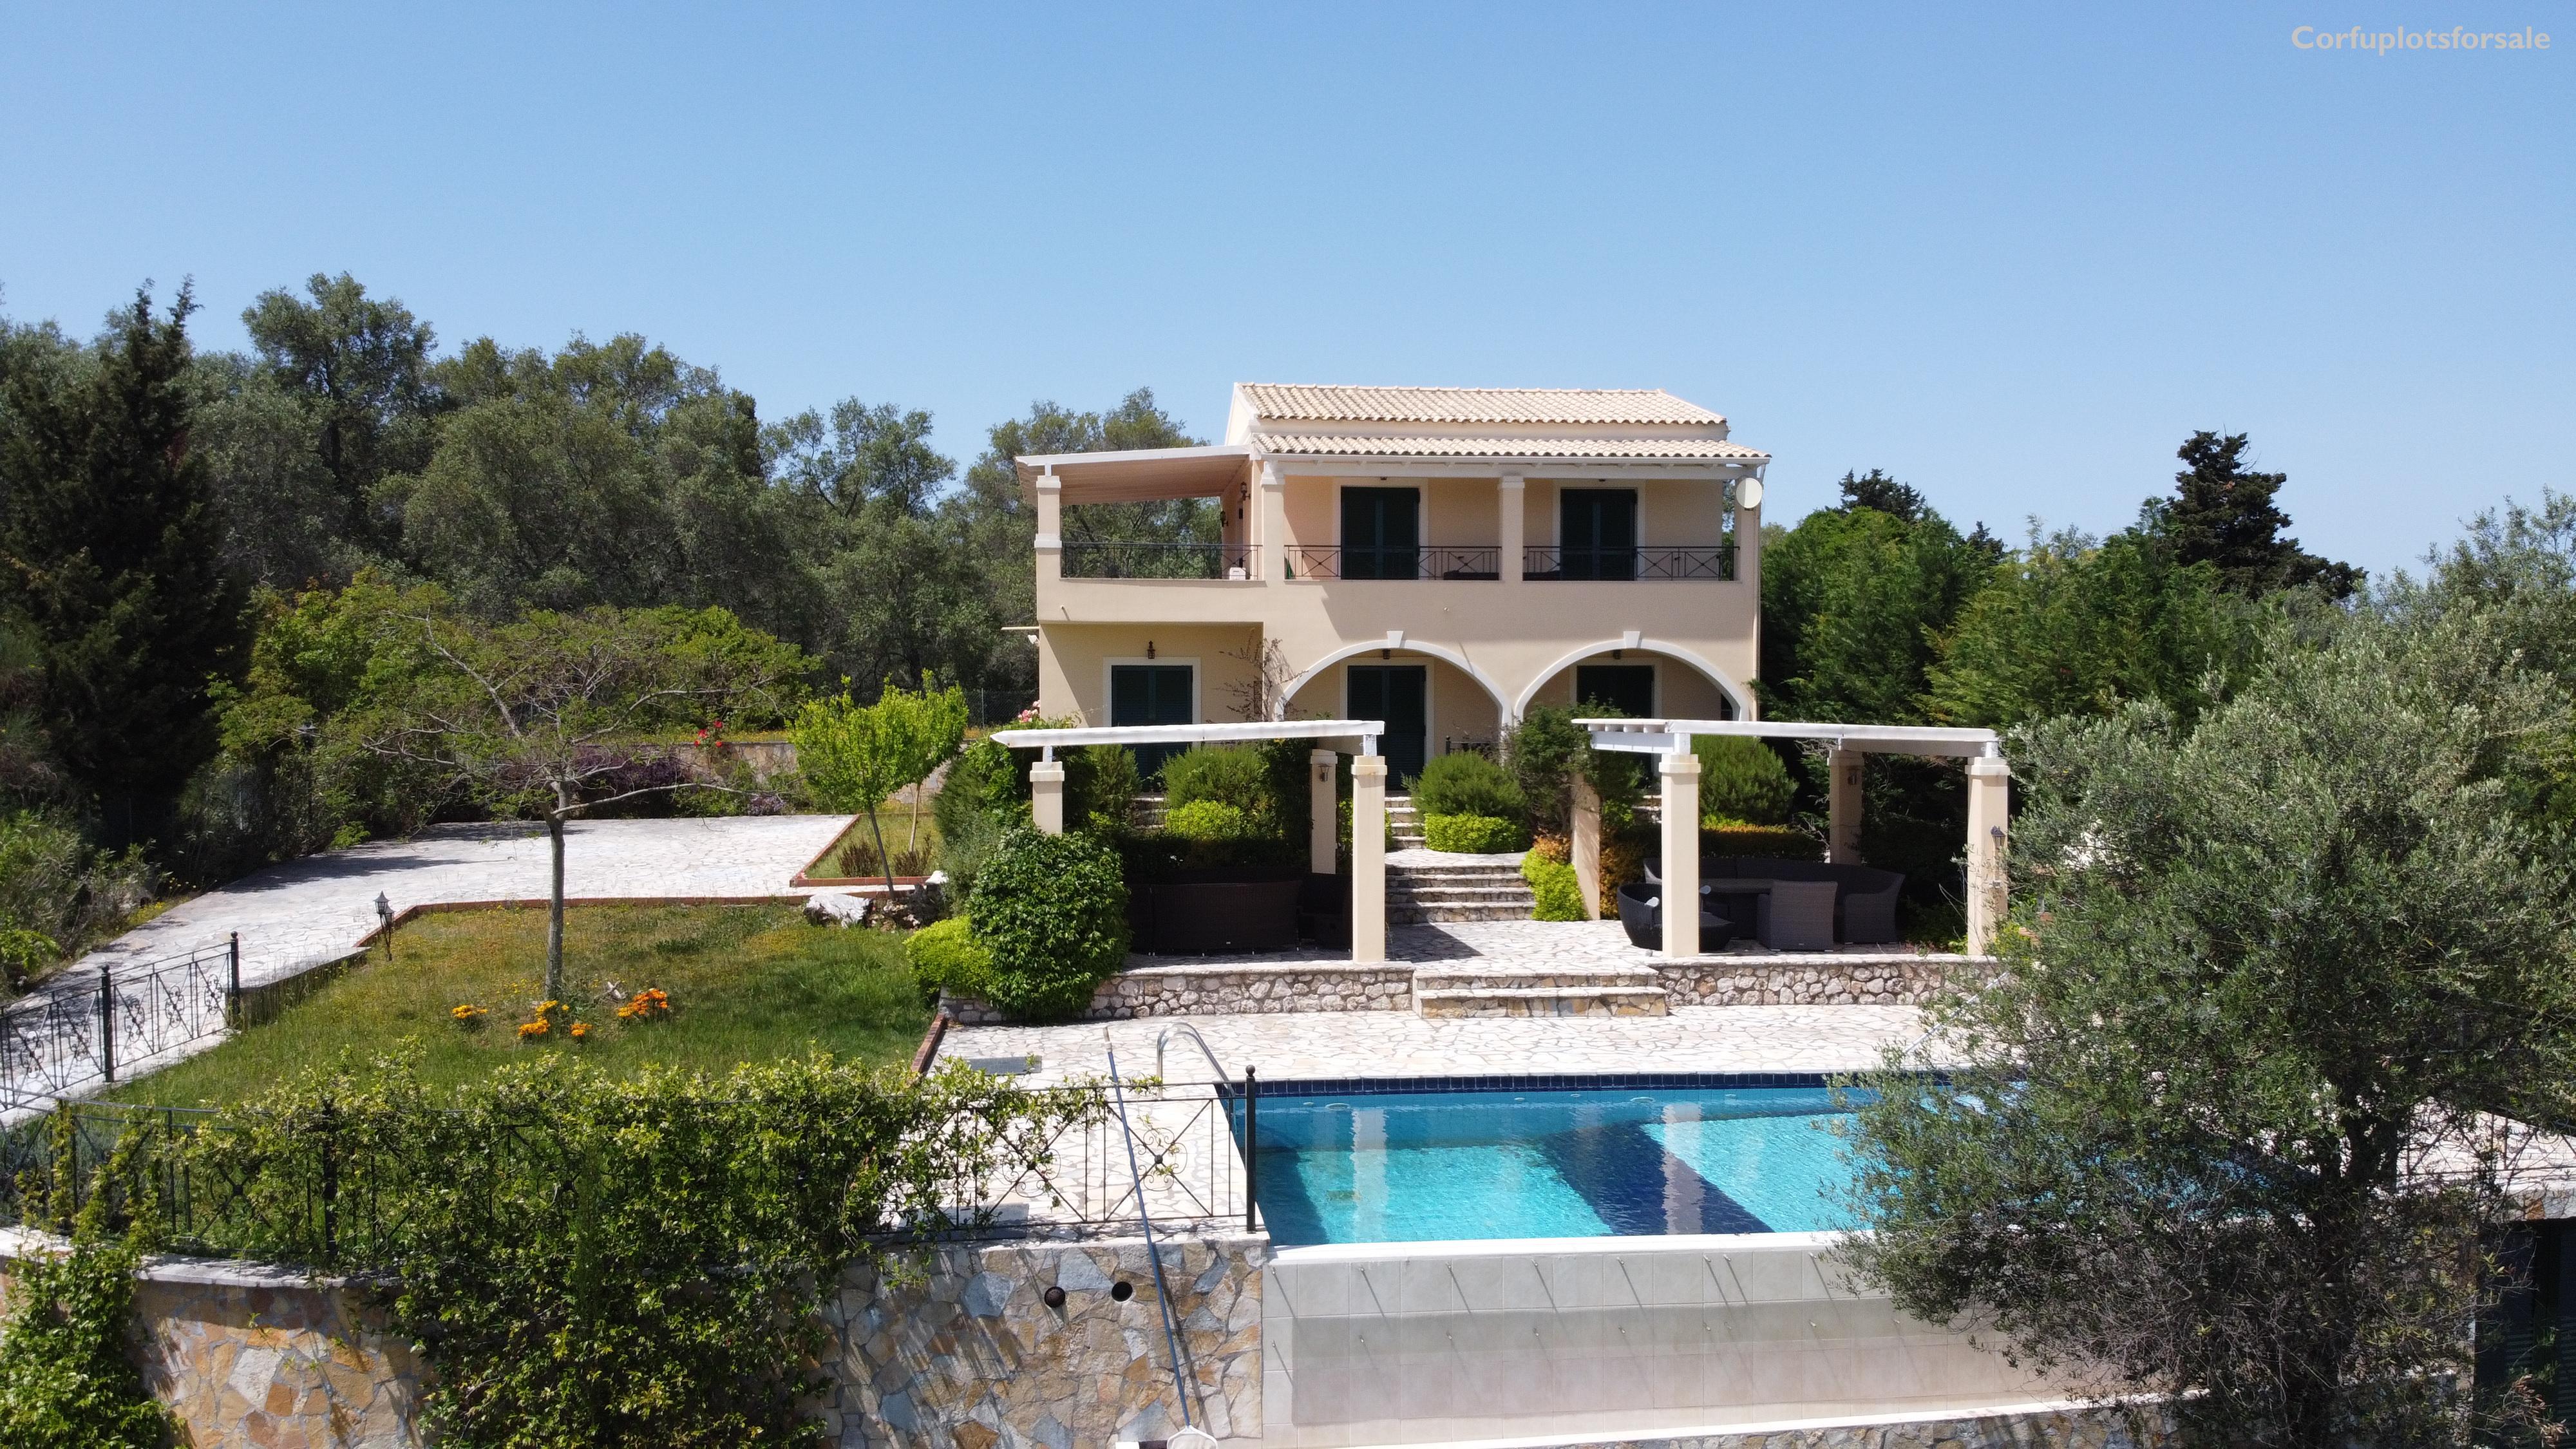 A 170 sq.m villa with basement and pool at the top of a hill in Poulades